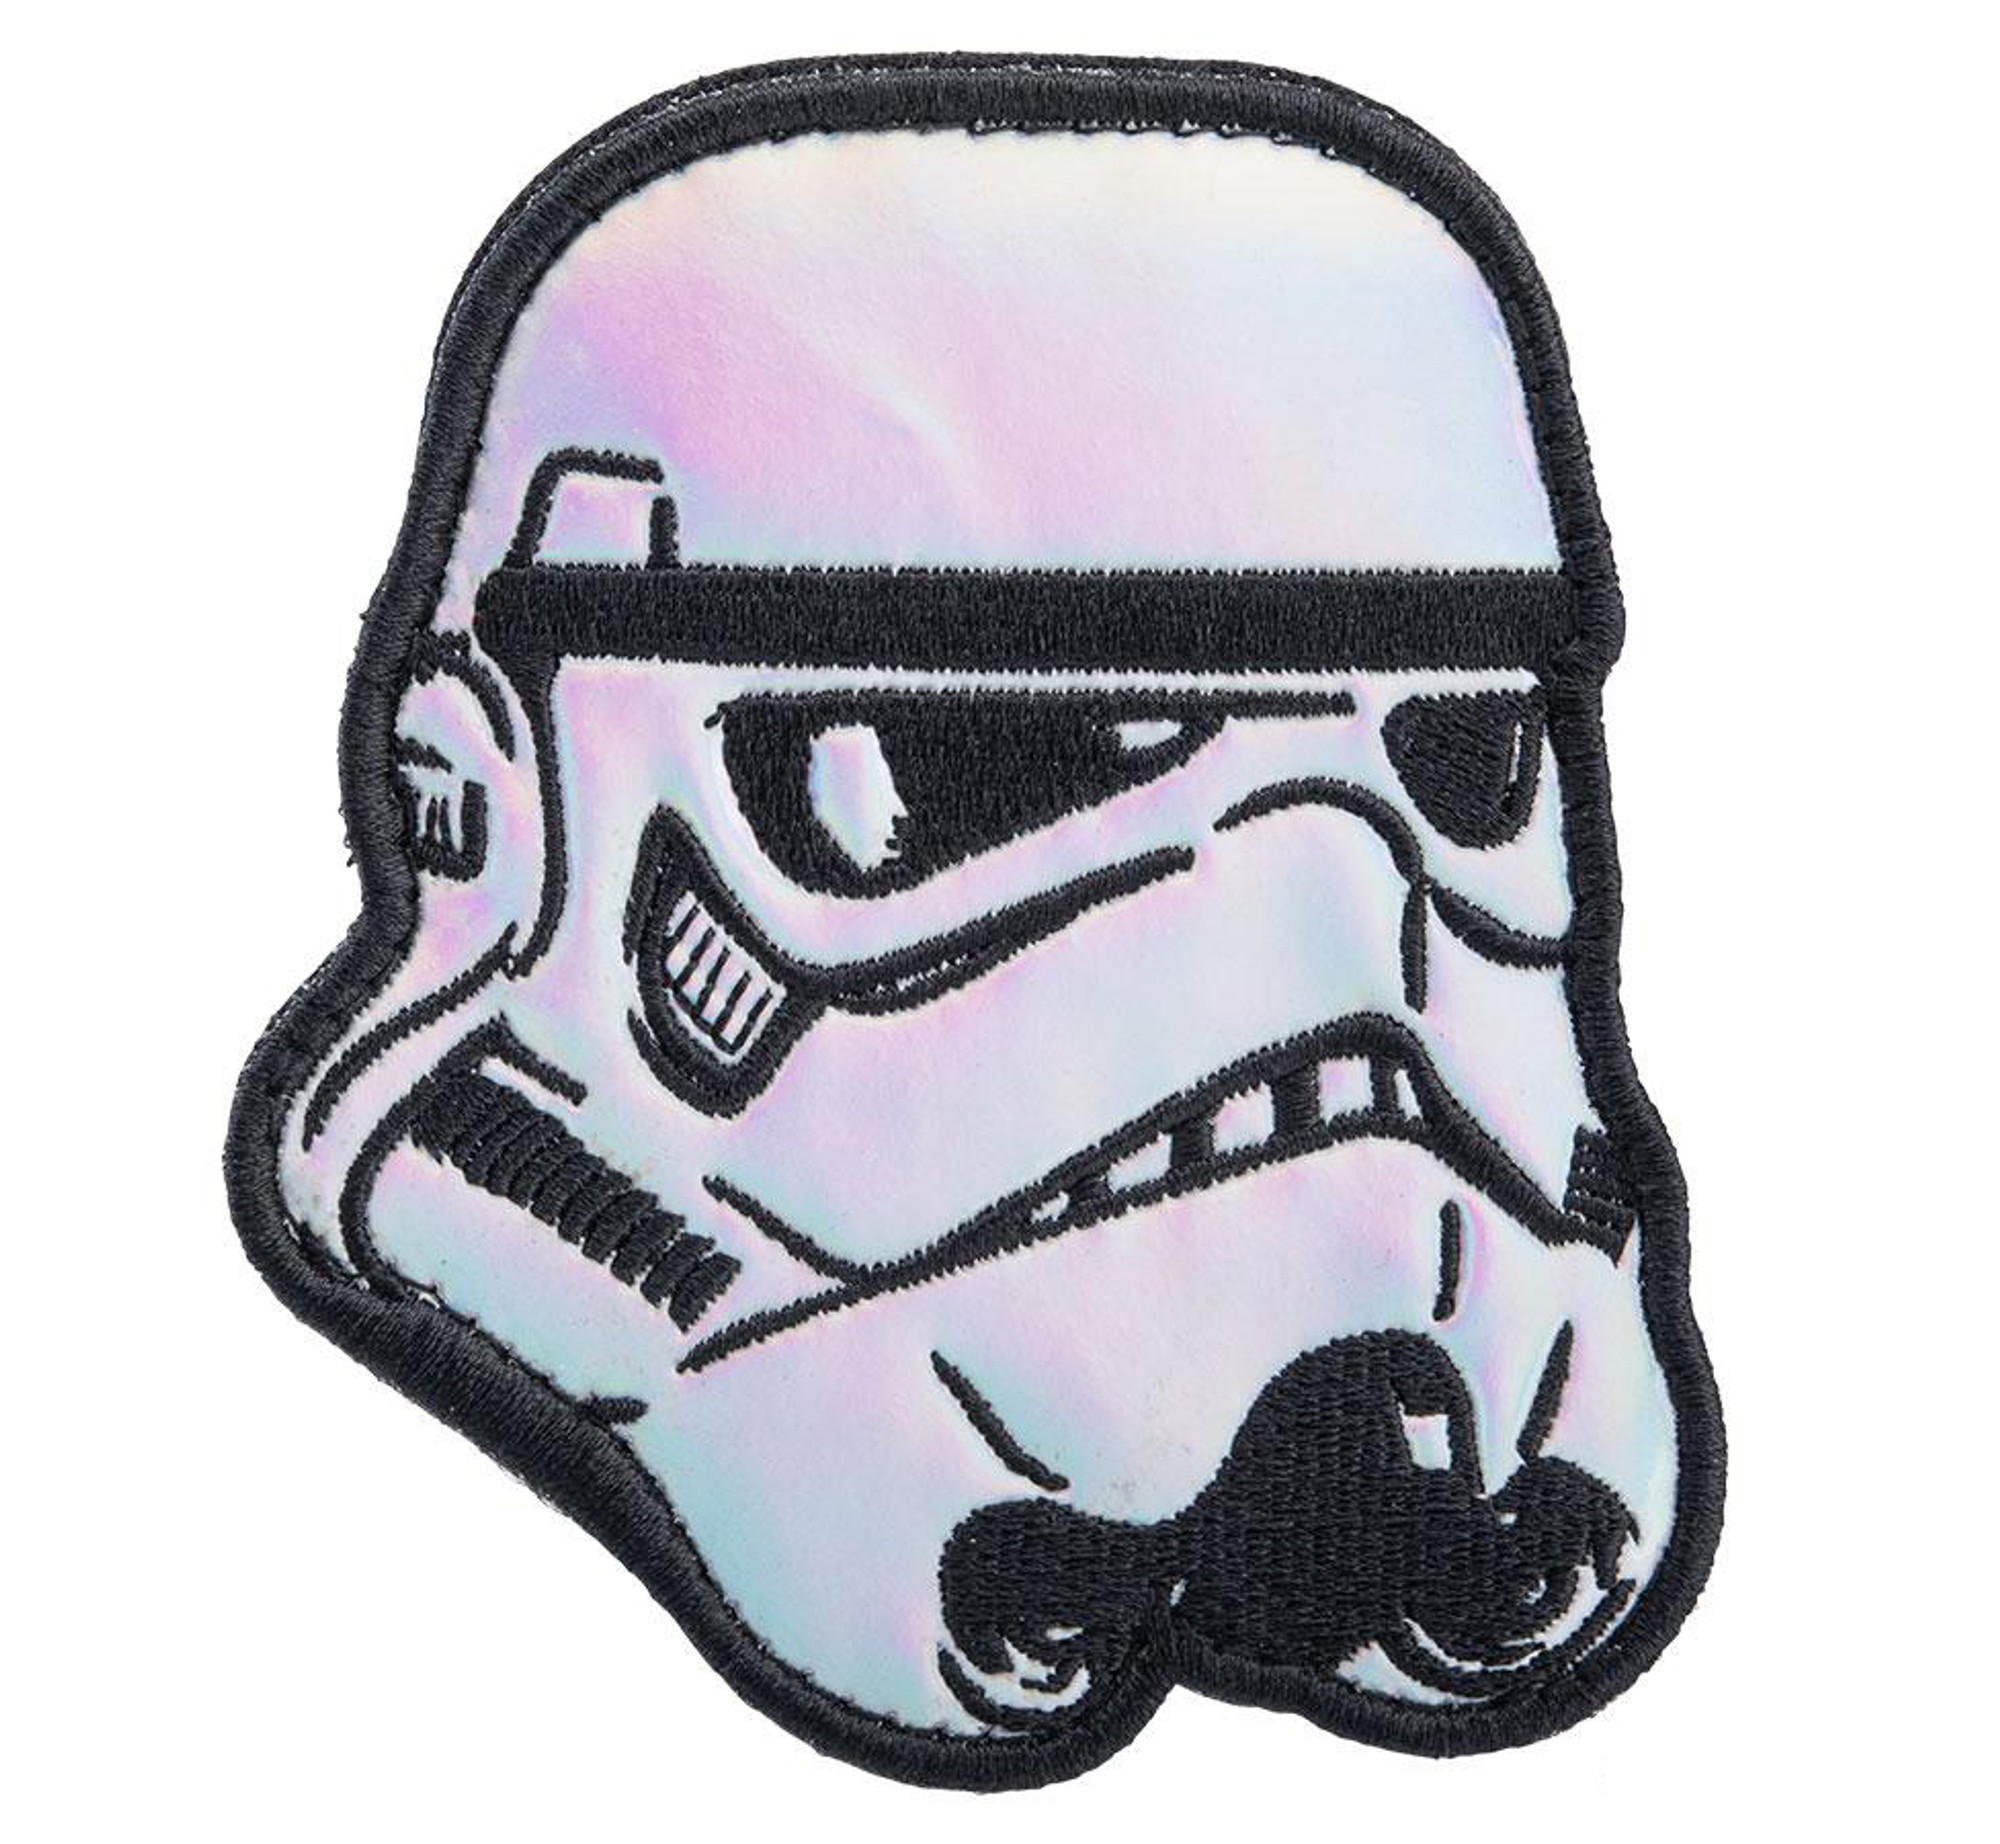 Tactical Outfitters "Holographic Stormtrooper" Embroidered Morale Patch